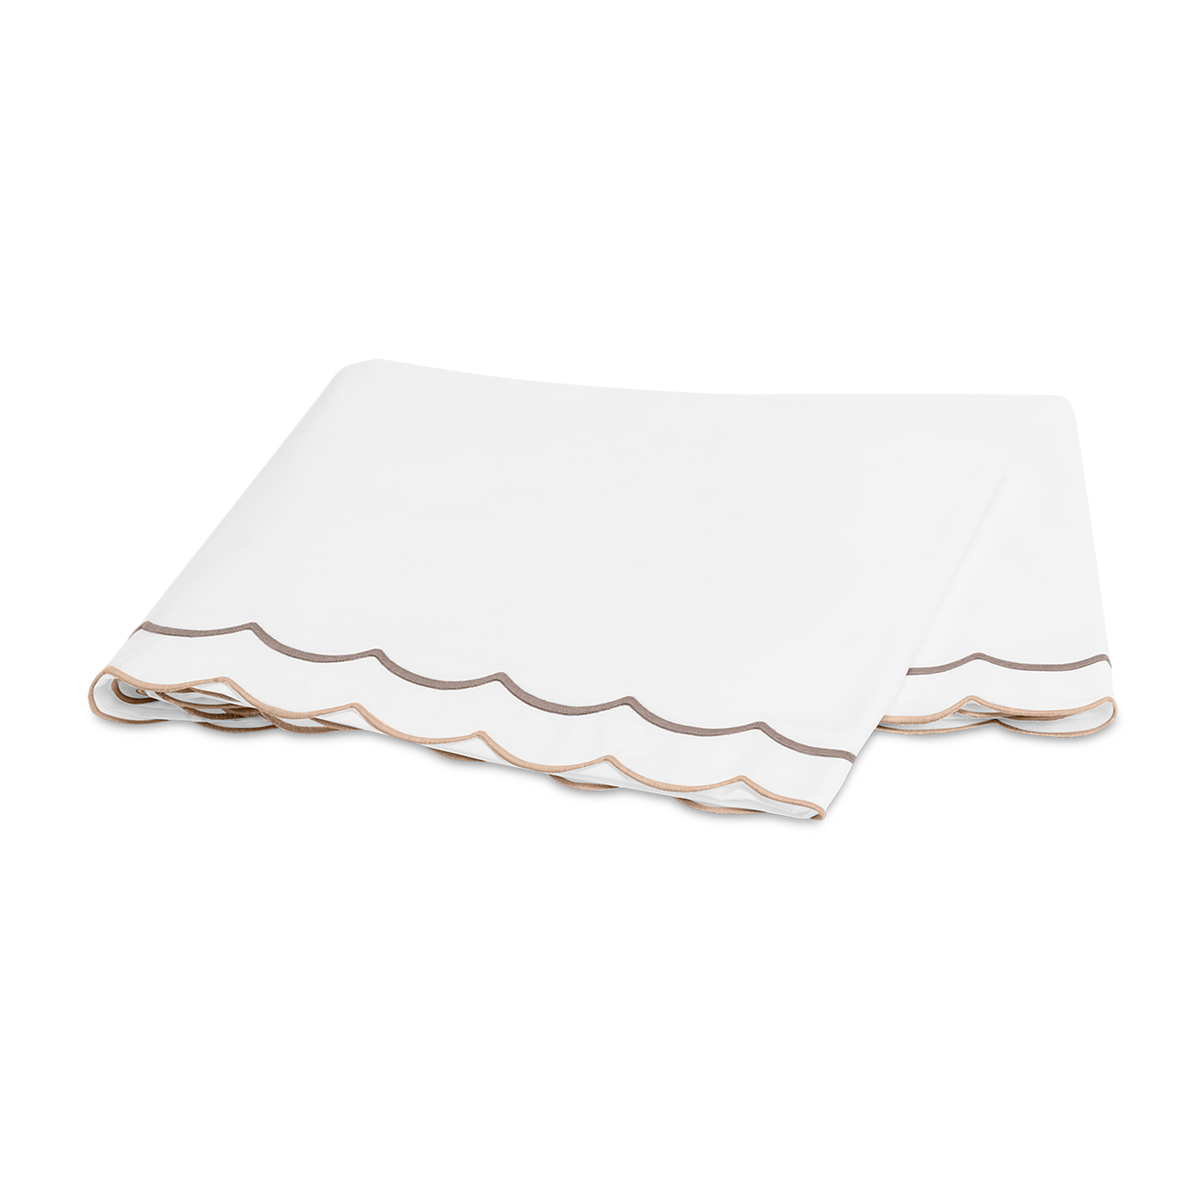 Flat Sheet of Matouk India Bedding in Driftwood Color